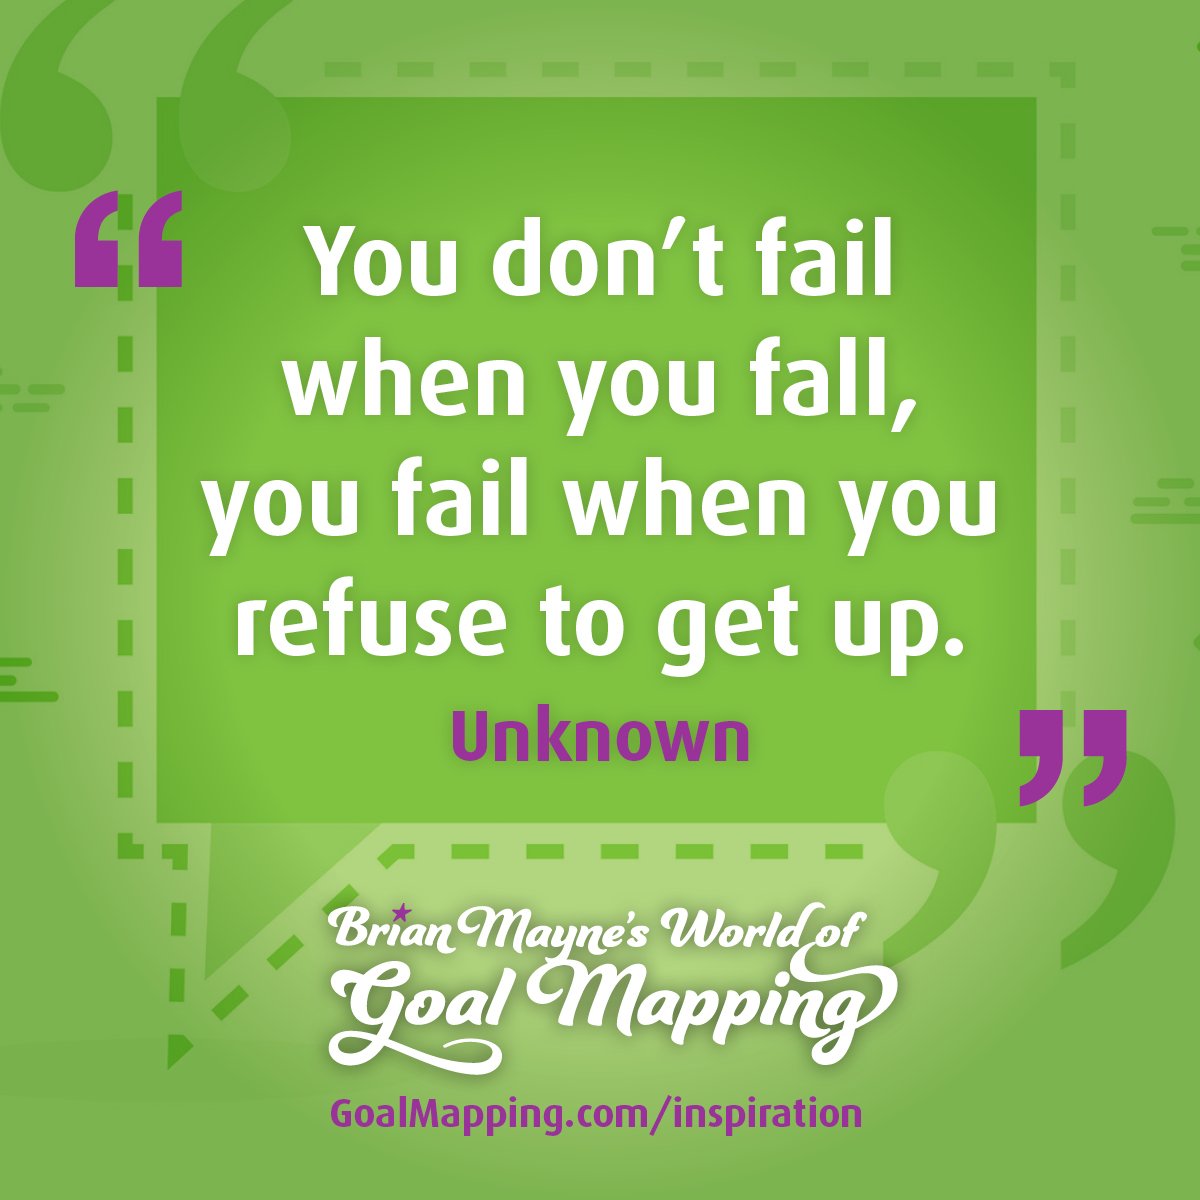 "You don’t fail when you fall, you fail when you refuse to get up." Unknown